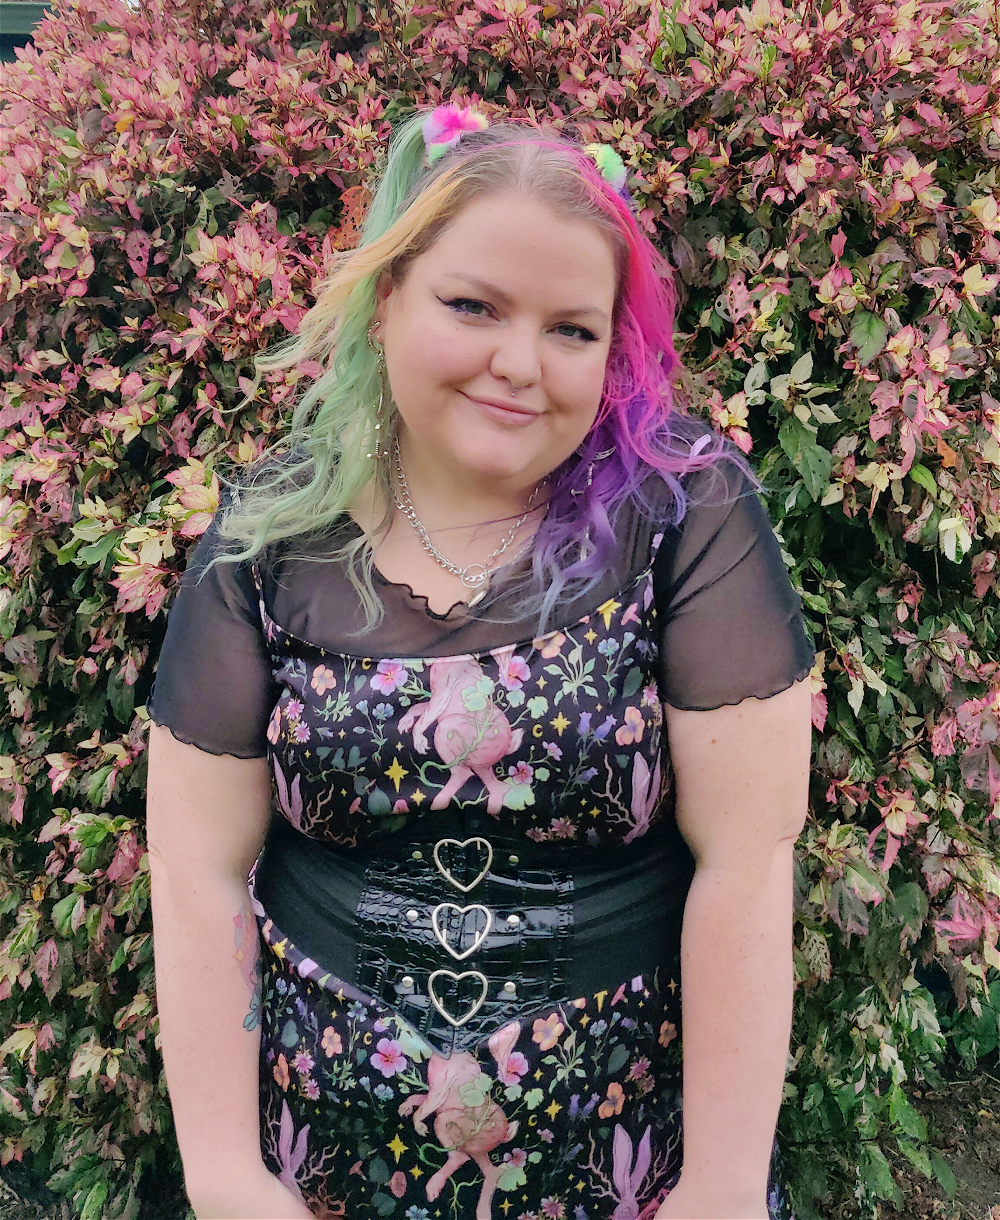 A chubby gal wearing a short sleeve lettuce hem mesh shirt with a midi length spaghetti strap dress in a floral and rabbit print dress. She wears silver mary jane shoes and a thick corset like beth with 3 silver hearts.